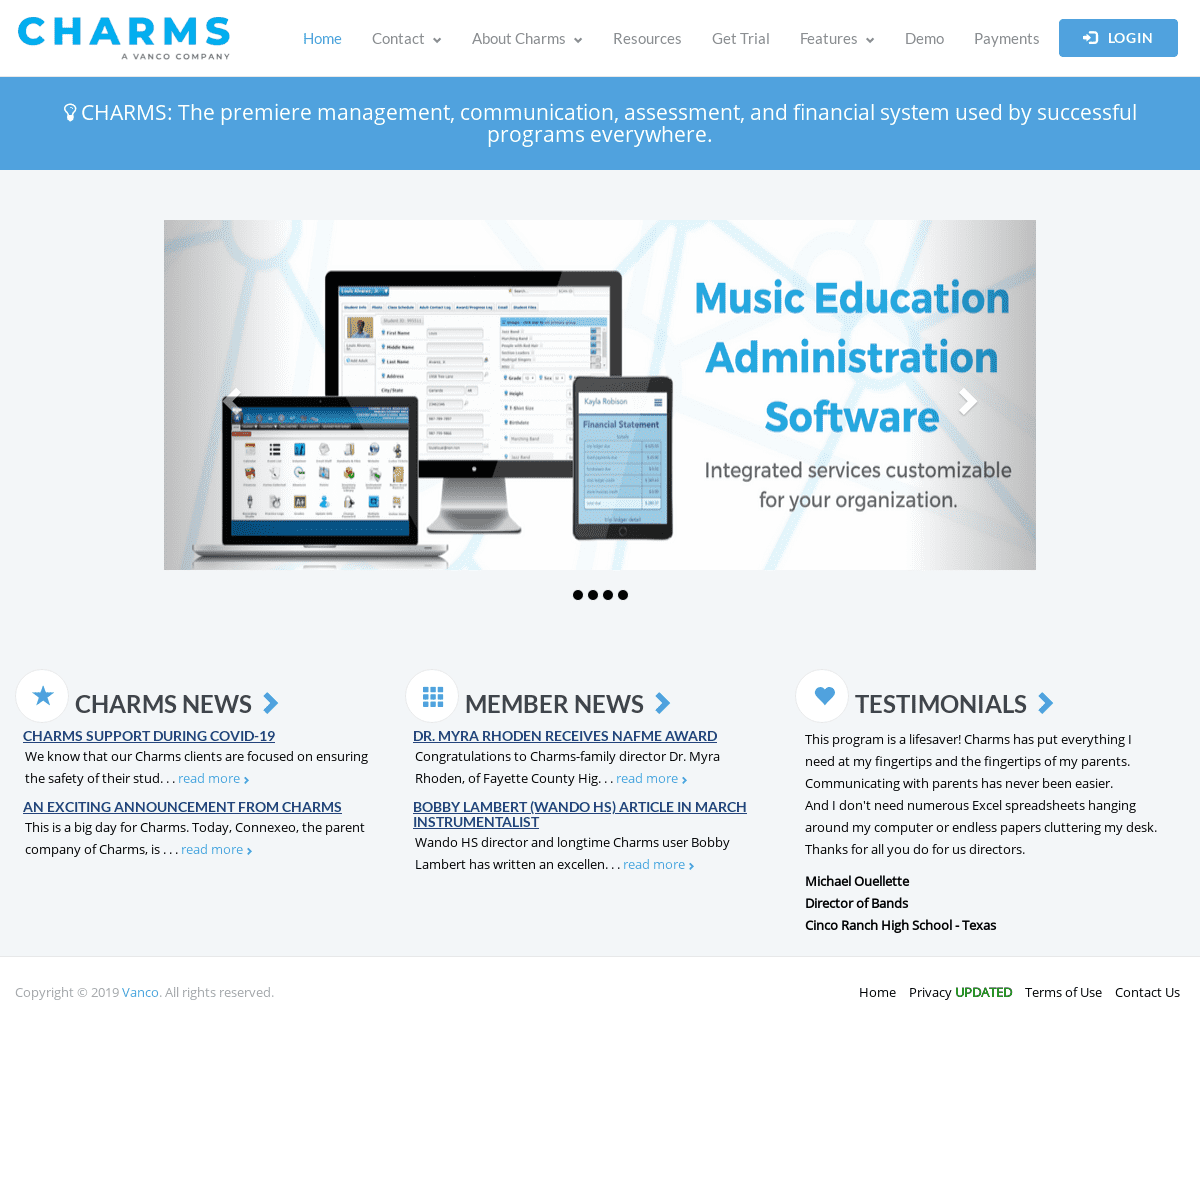 A complete backup of https://charmsoffice.com